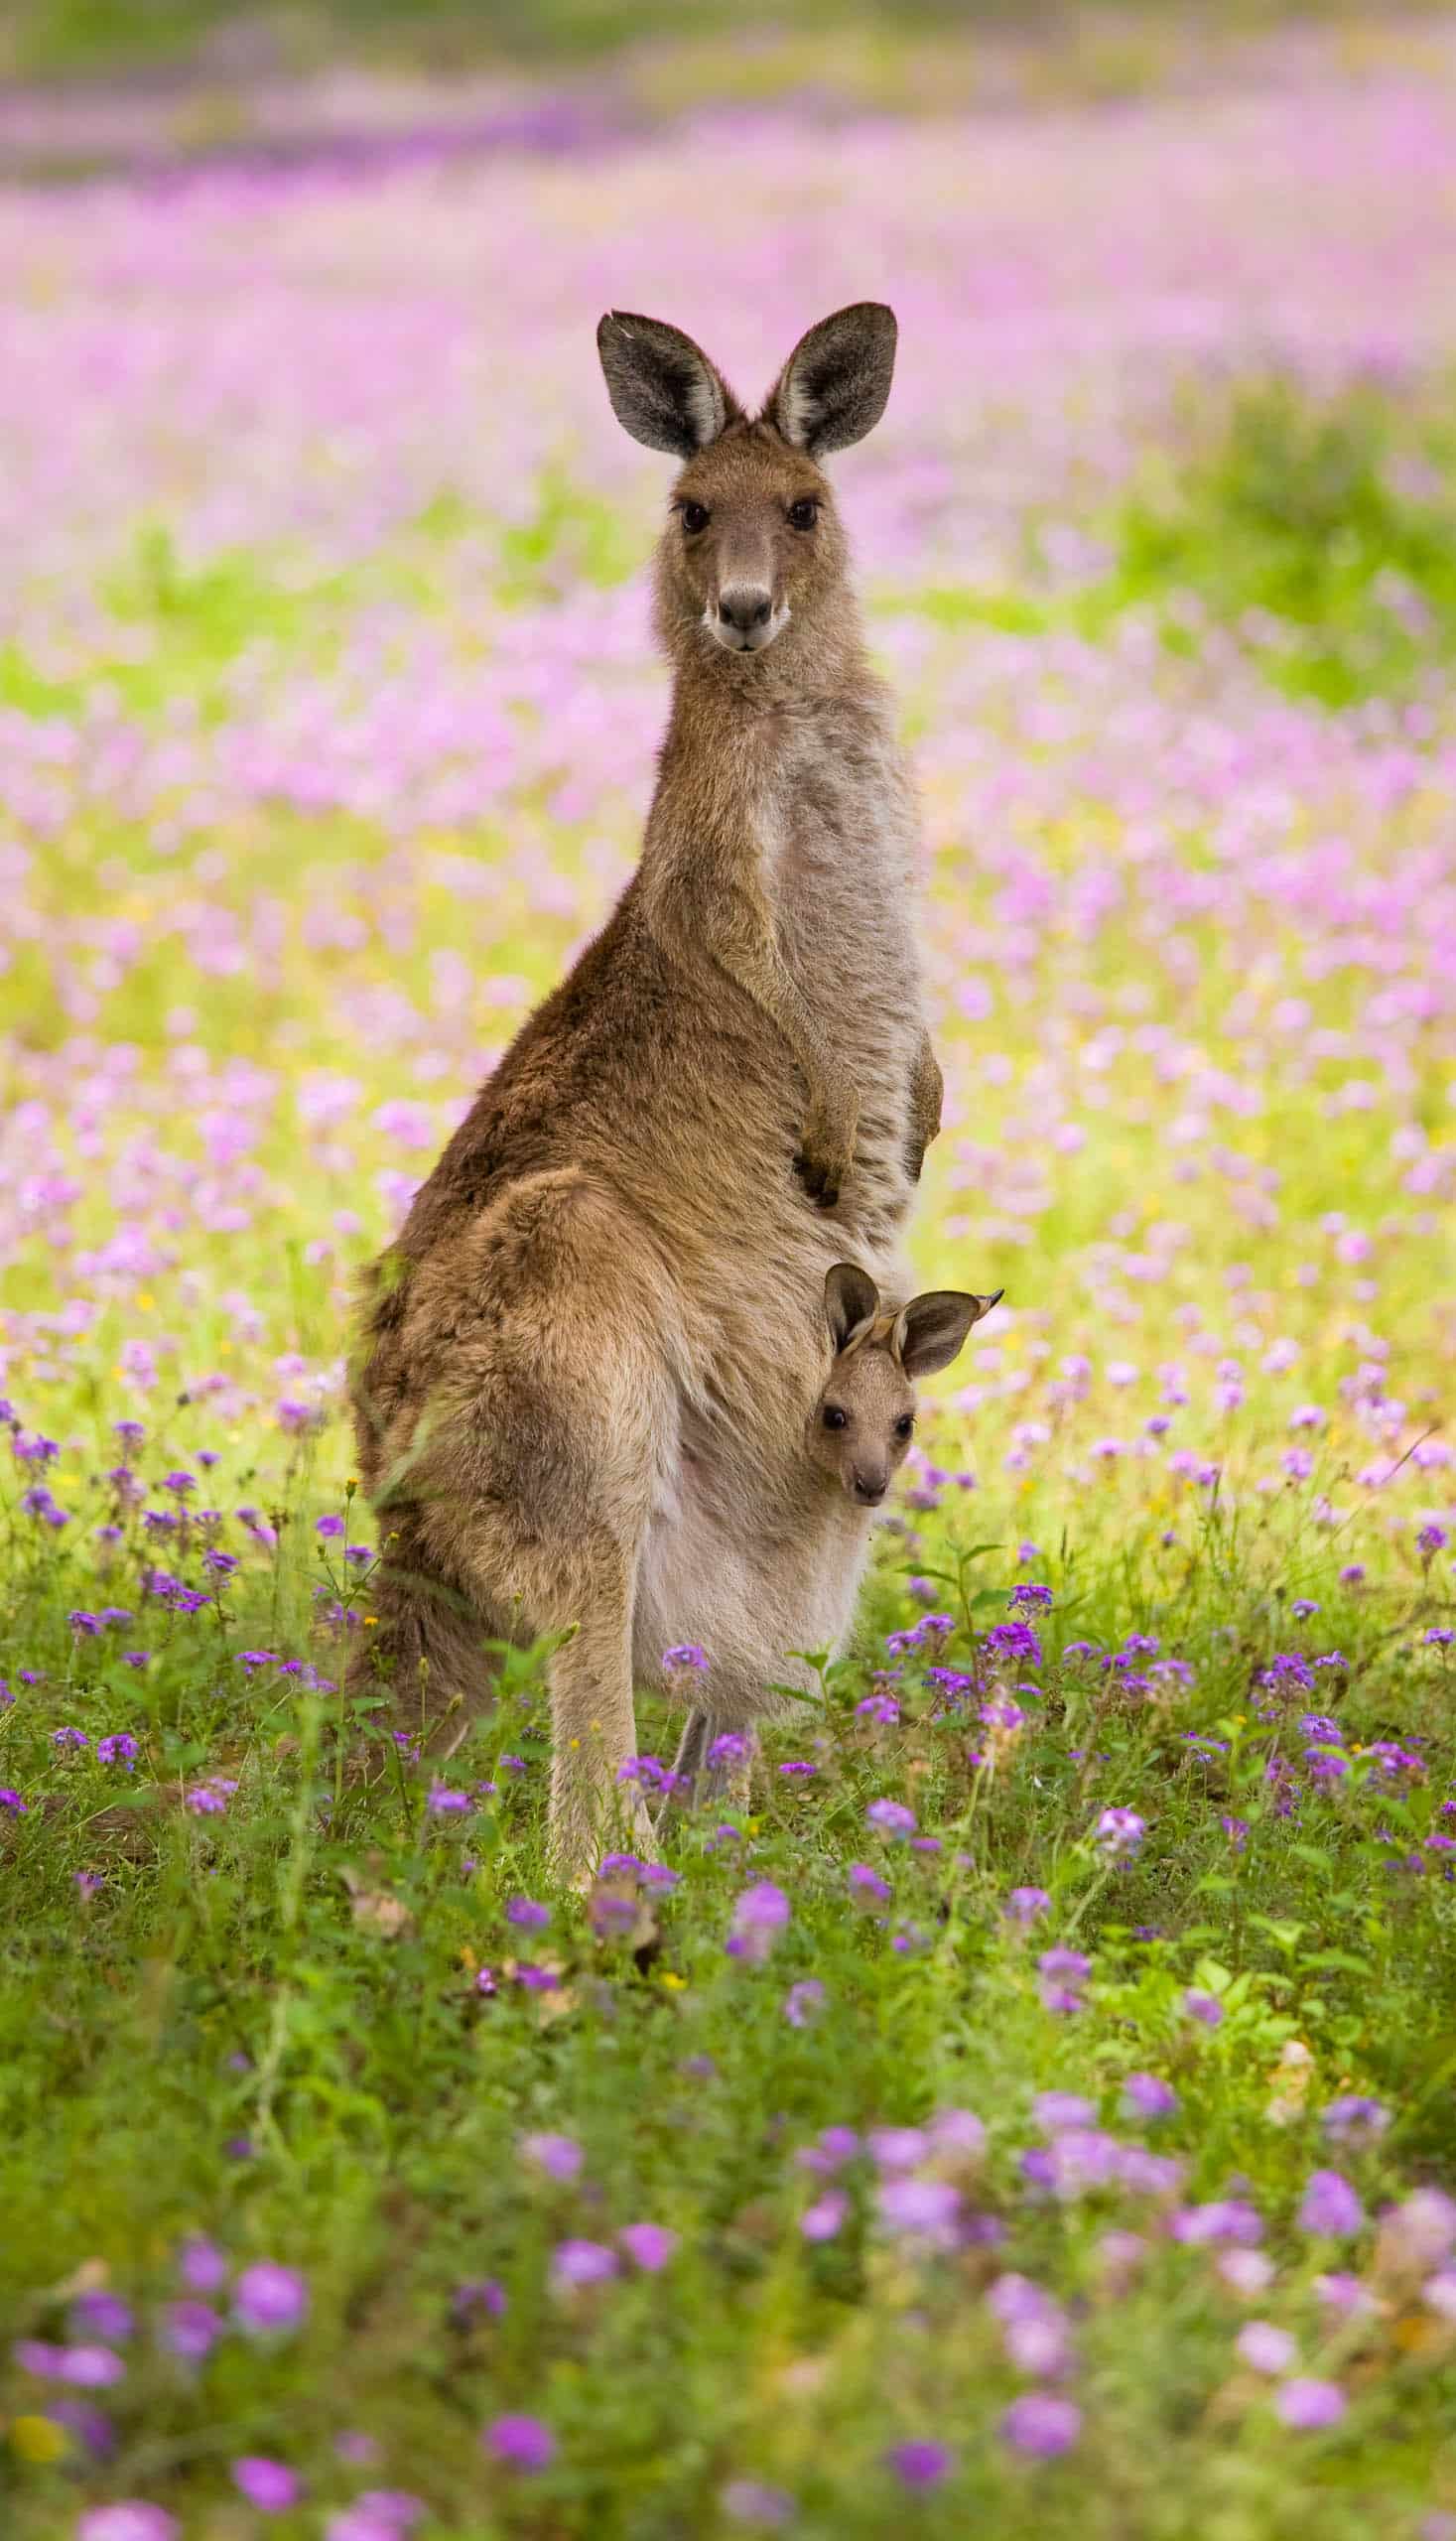 A kangaroo with its baby in its pouch.